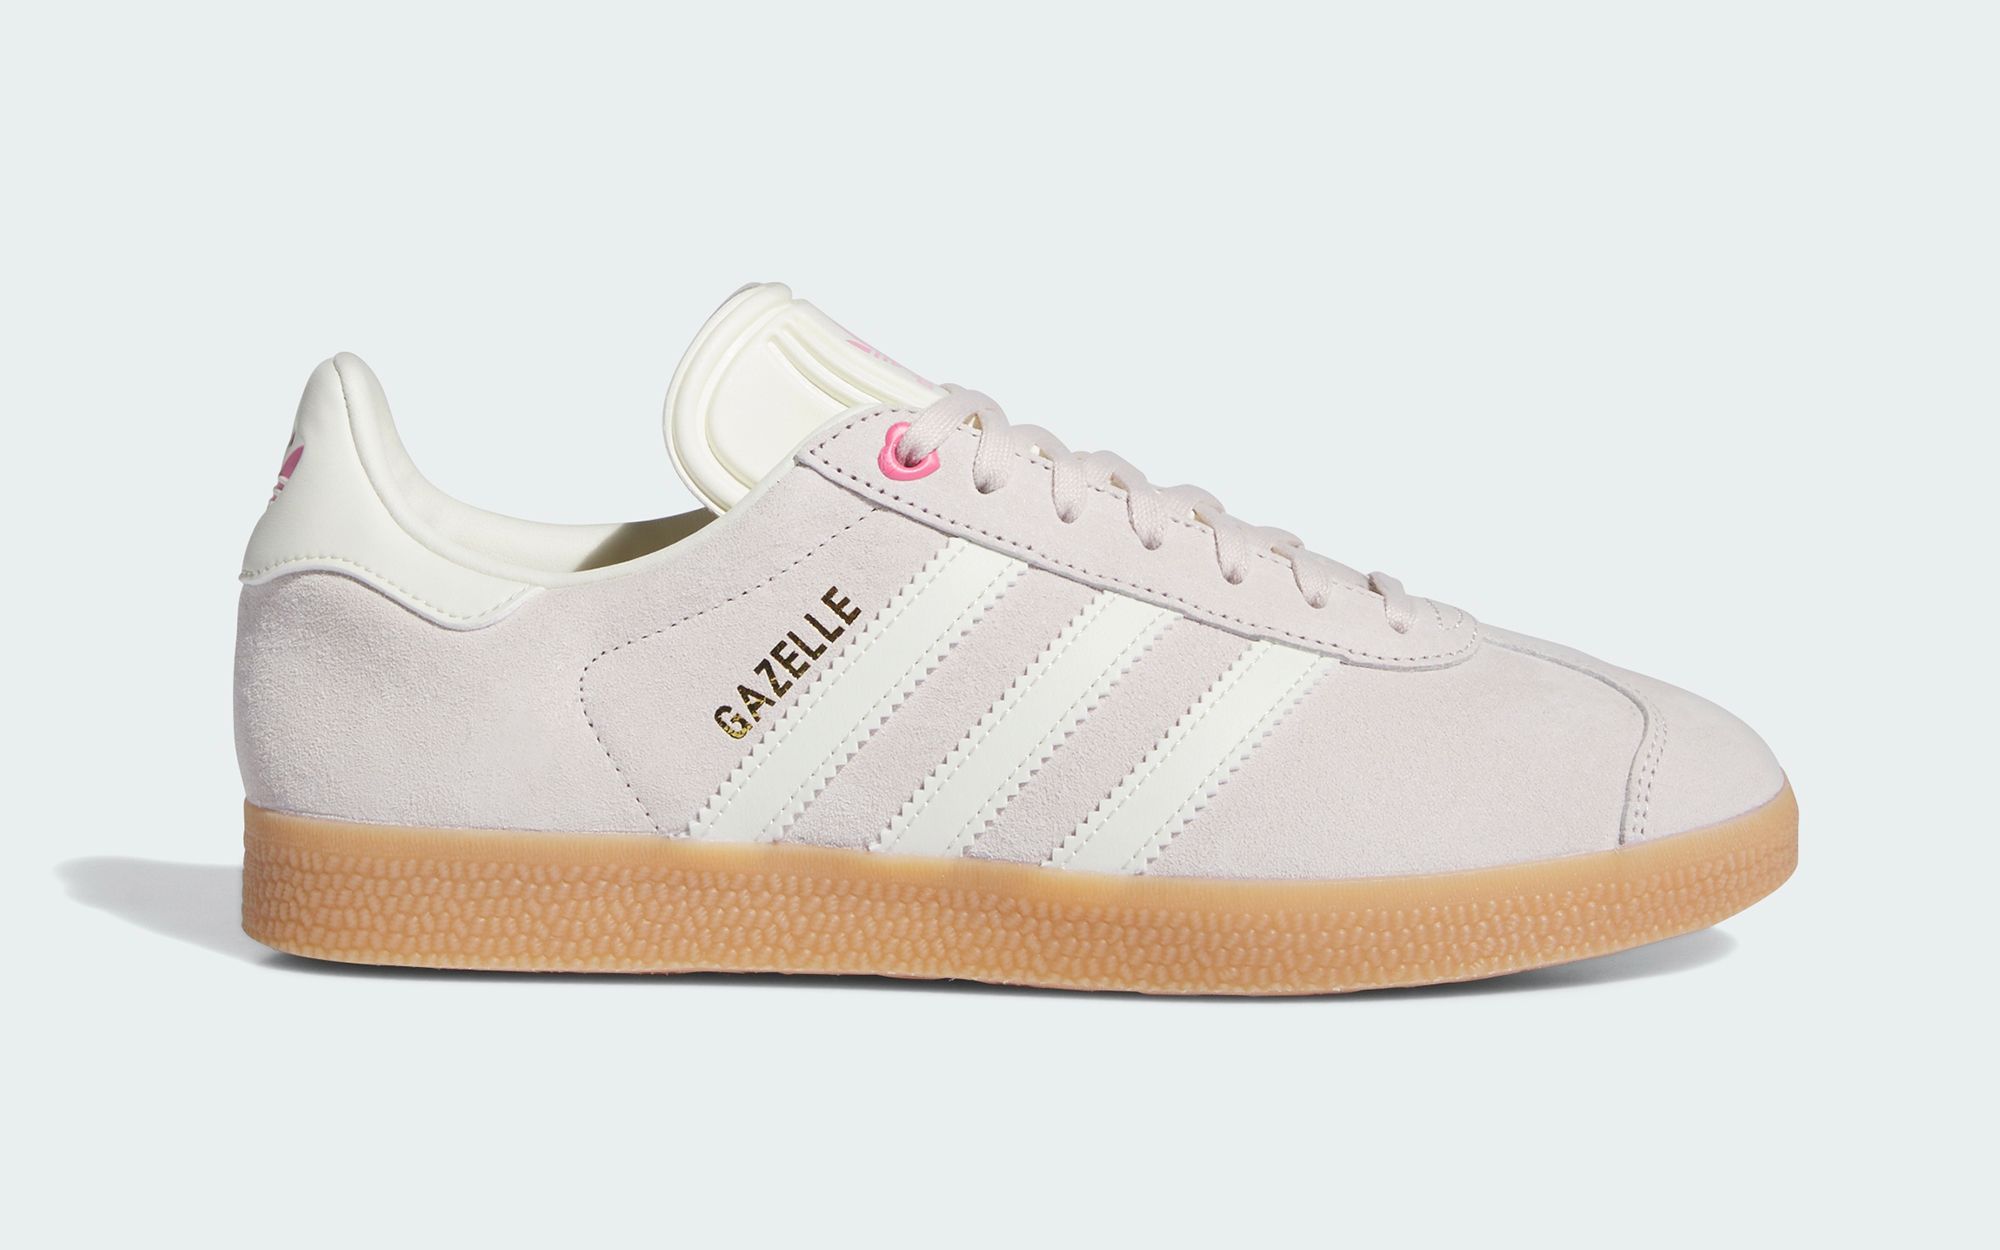 Where to Buy the adidas Gazelle Indoor Bliss Pink